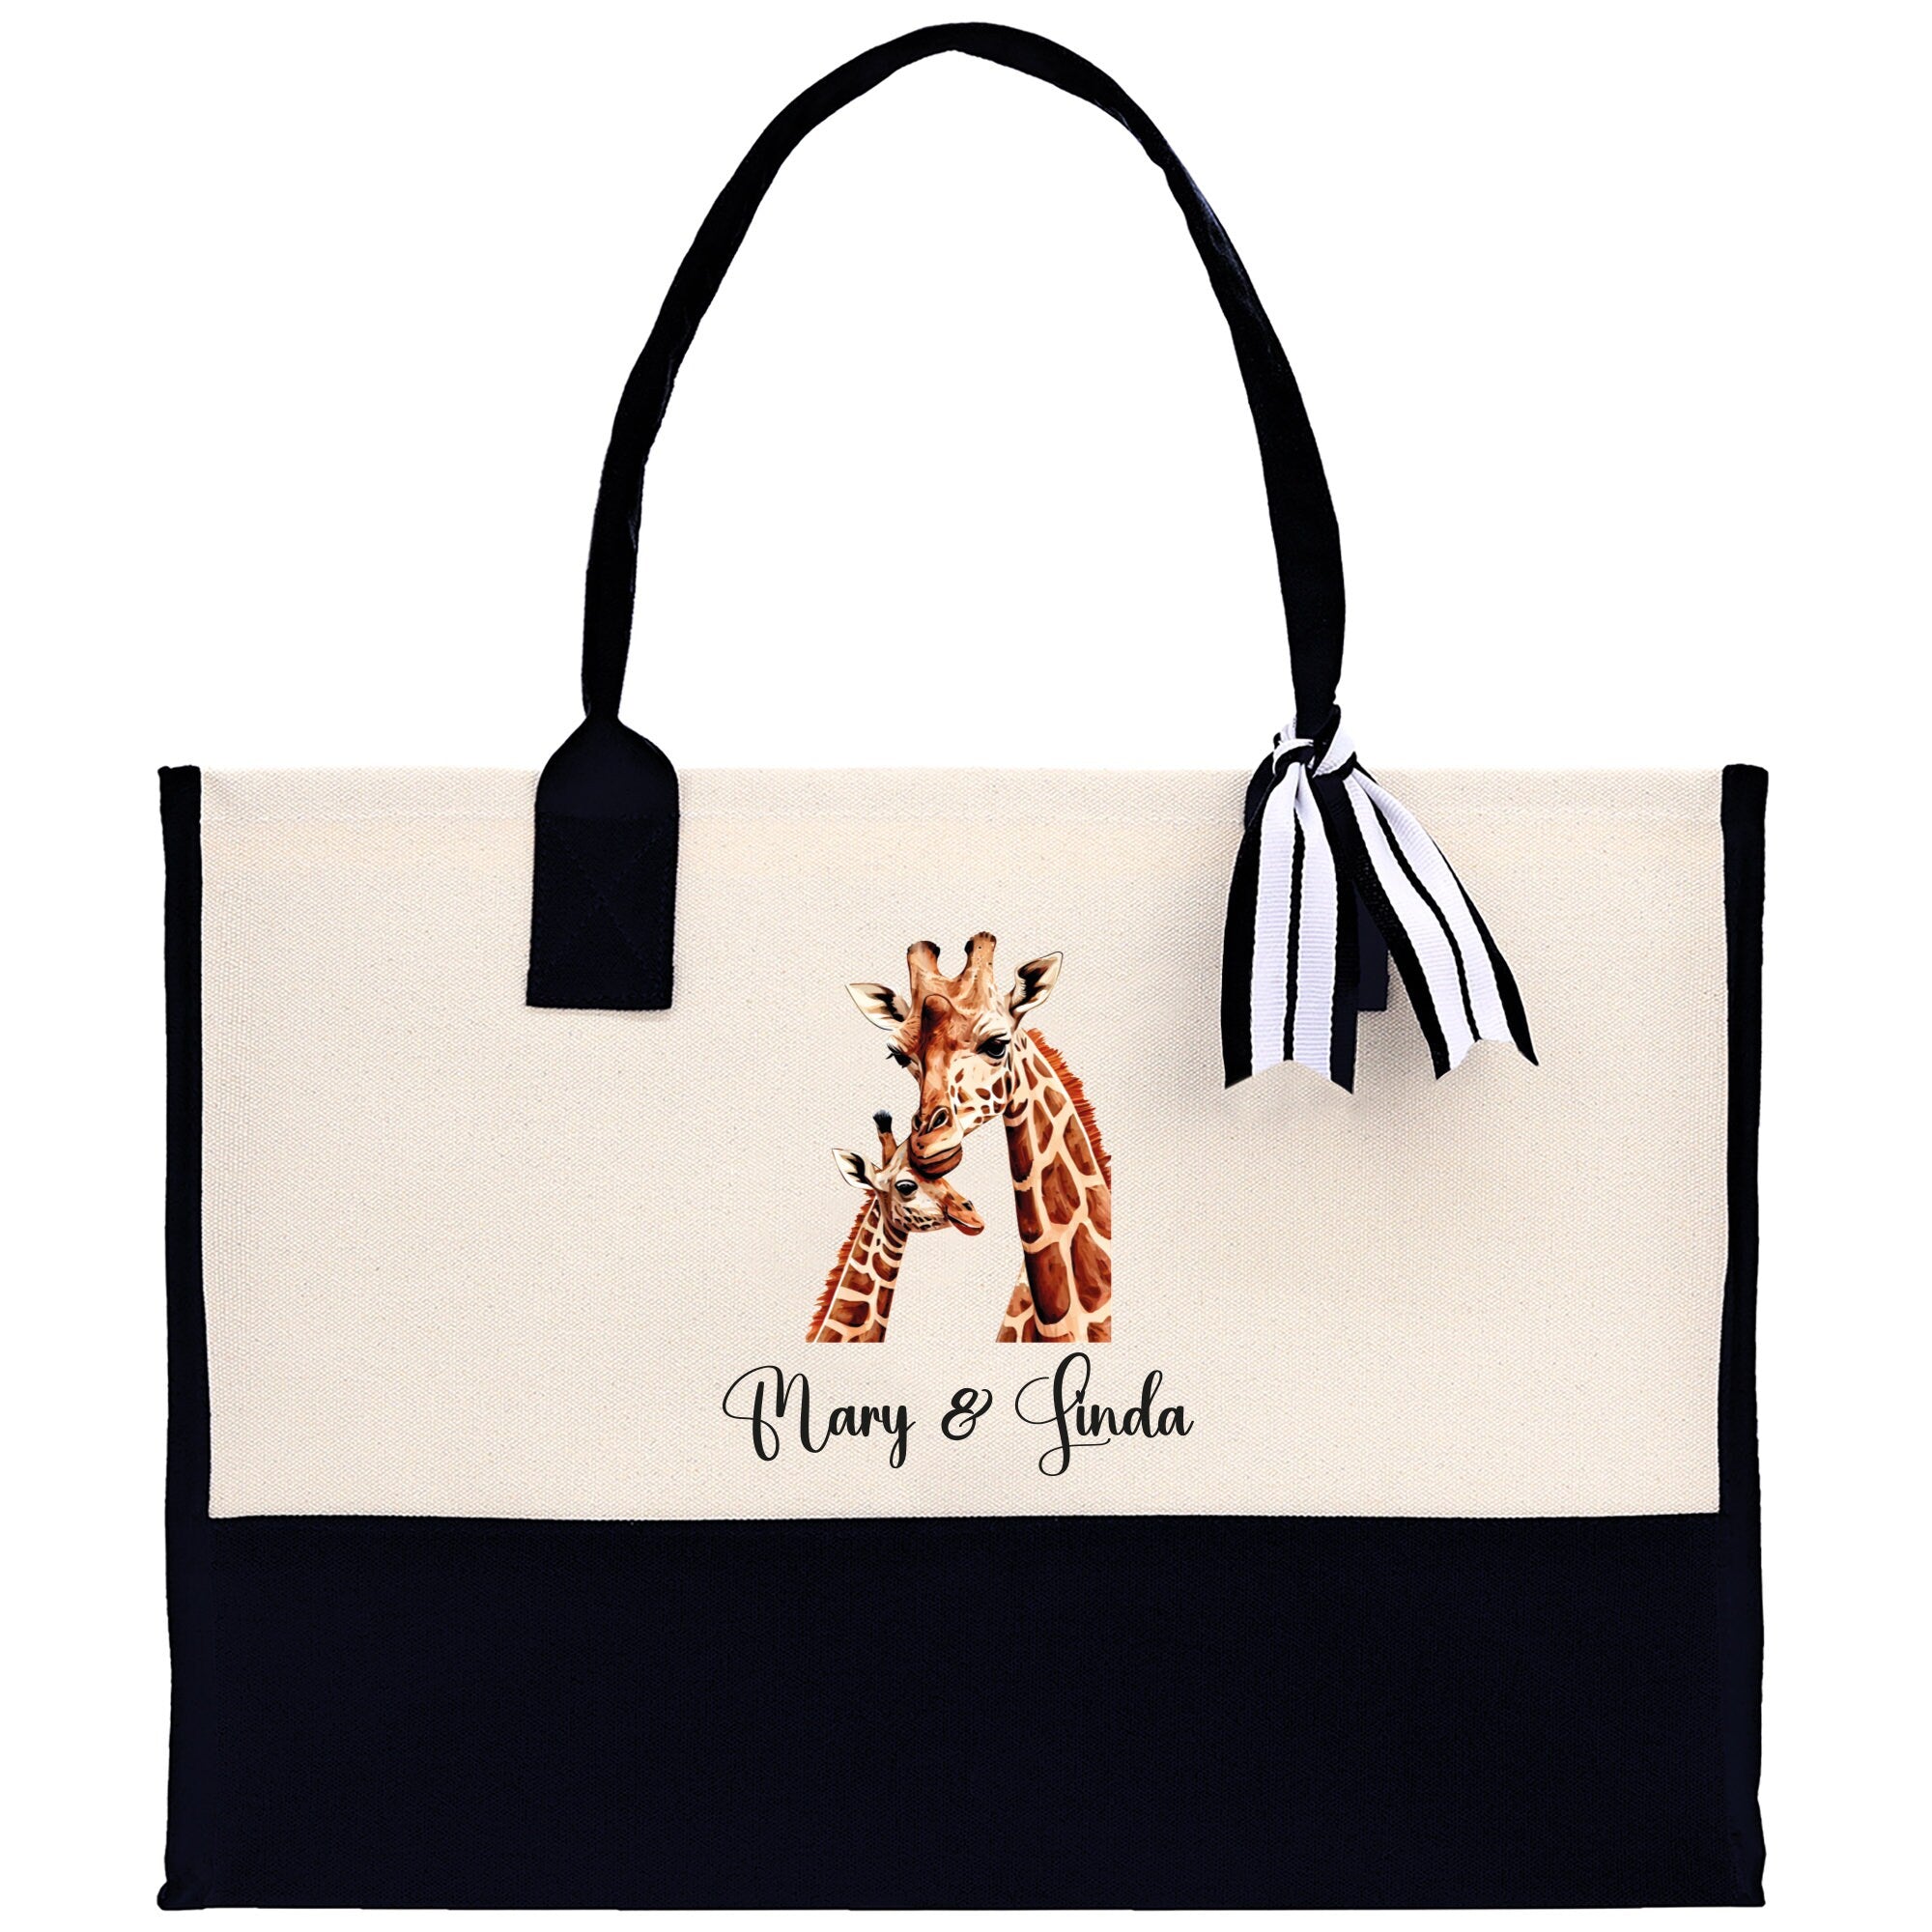 Giraffe Mom And Baby Name Custom Cotton Canvas Tote Bag Custom Pet Lover Gift Pet Portrait Bag Personalized Pet Owner Gift Tote Bag